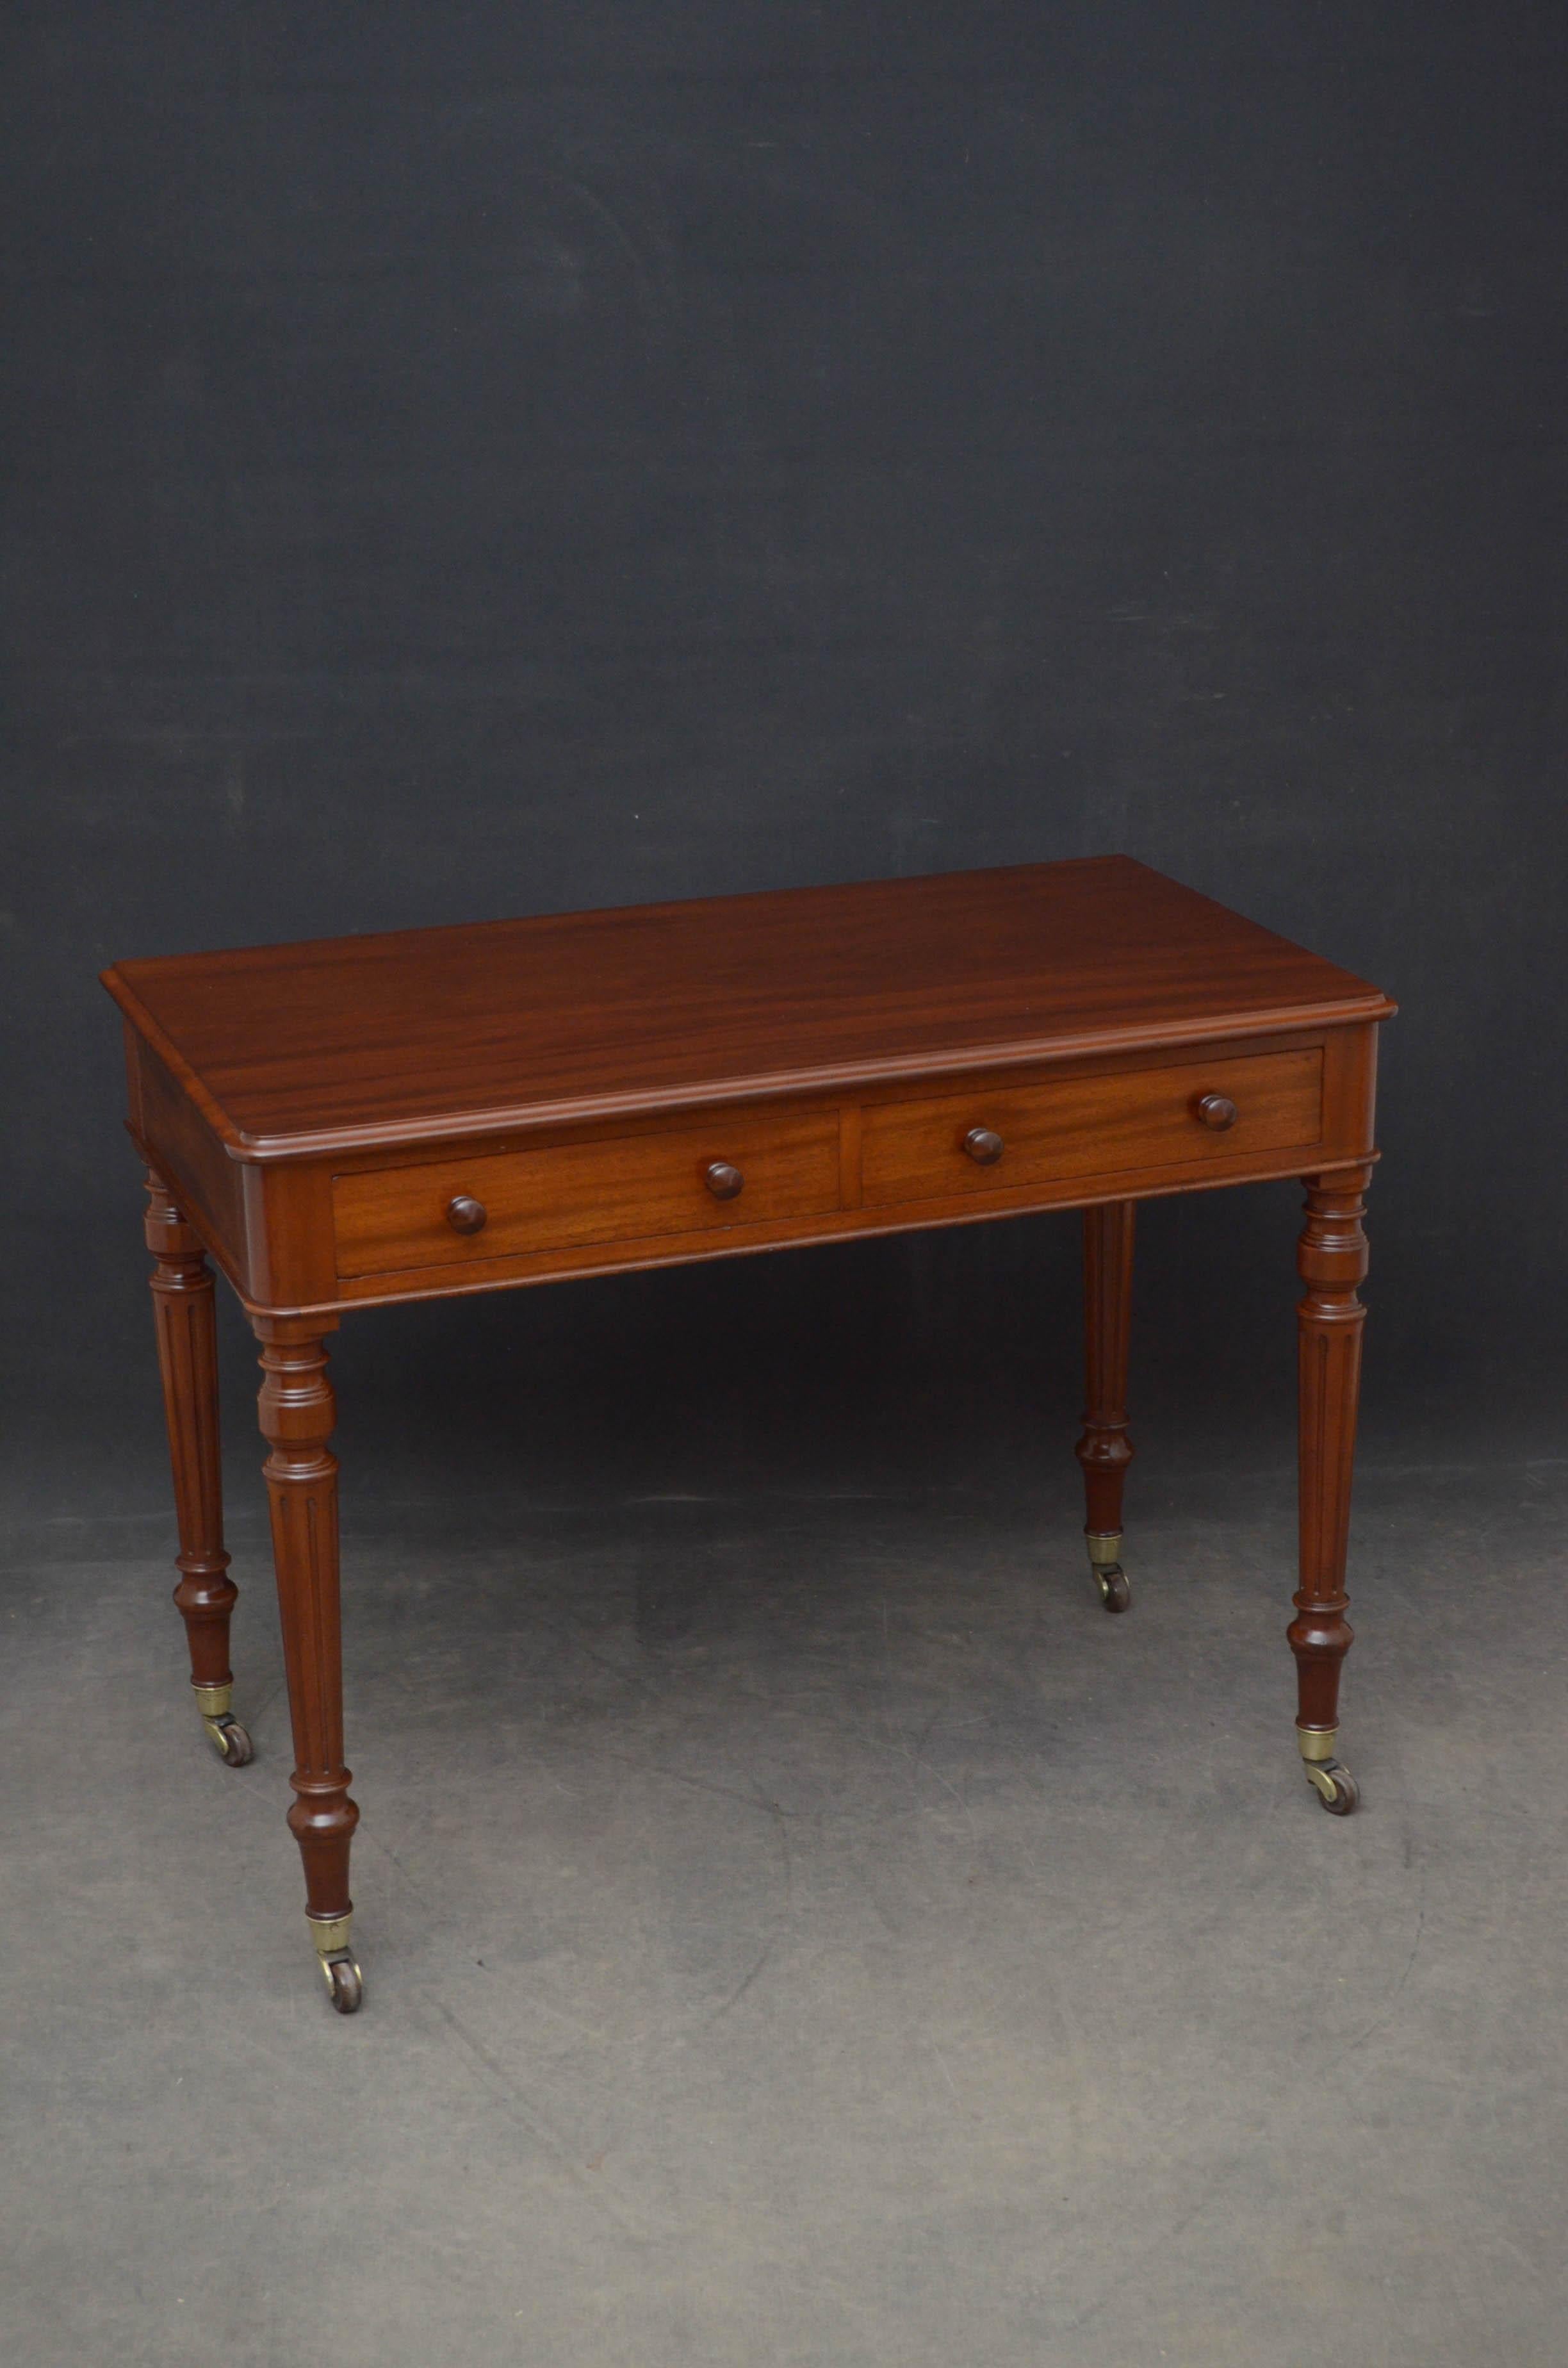 Sn4836 fine quality English, Victorian writing table, having solid mahogany figured top with moulded edge above 2 frieze drawers (stamped on edge Wilkinson & Son, 8 Old Bond Street) fitted with original turned handles, standing on elegant, turned